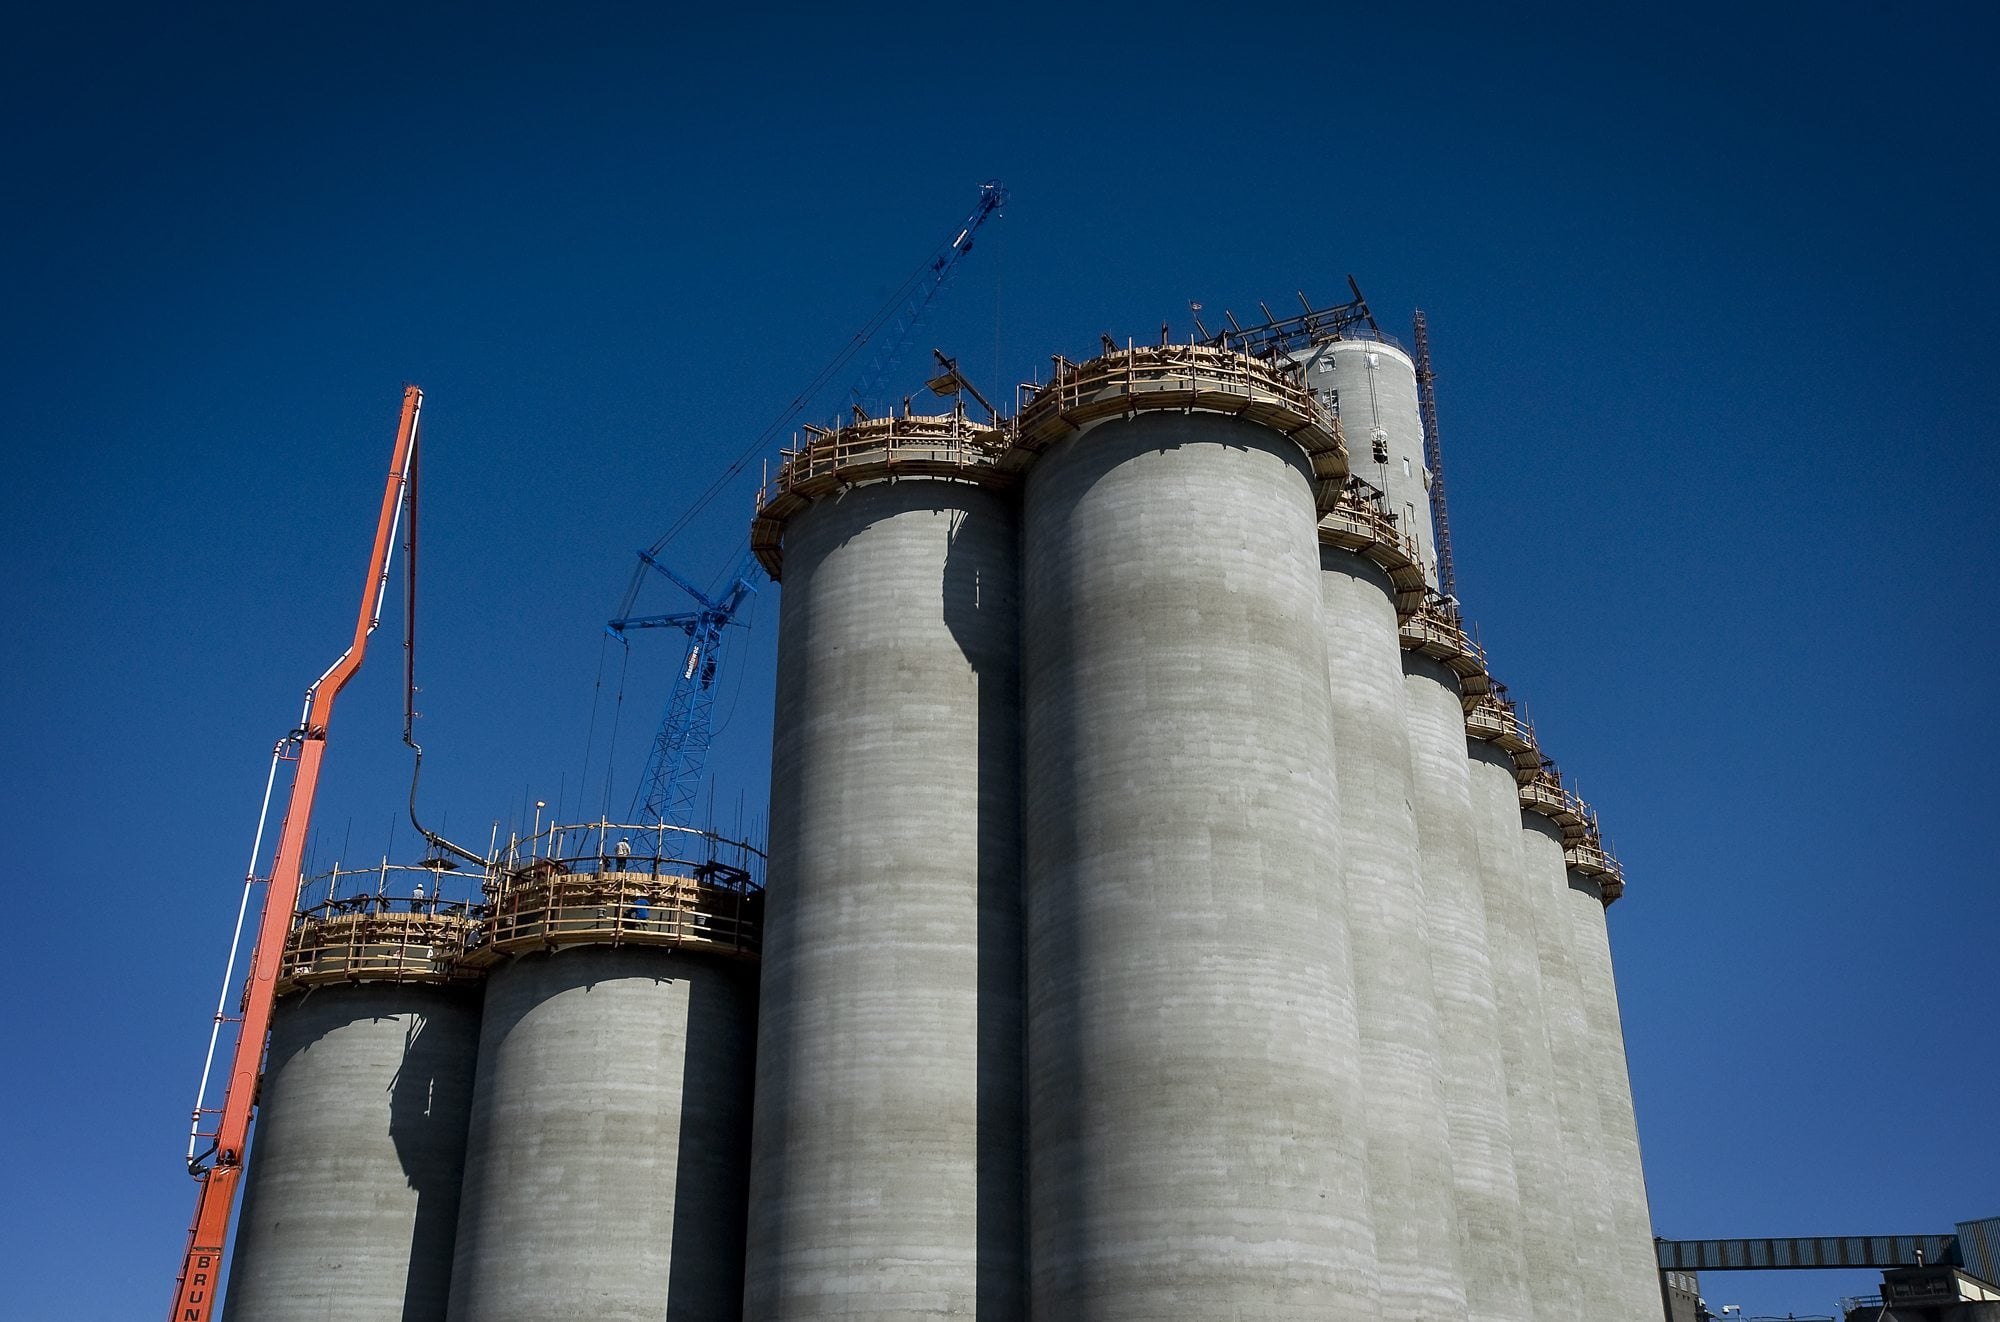 Three area state lawmakers have raised concerns about the use of labor on a grain silo project at the Port of Vancouver. Company officials say the concerns have no factual basis.